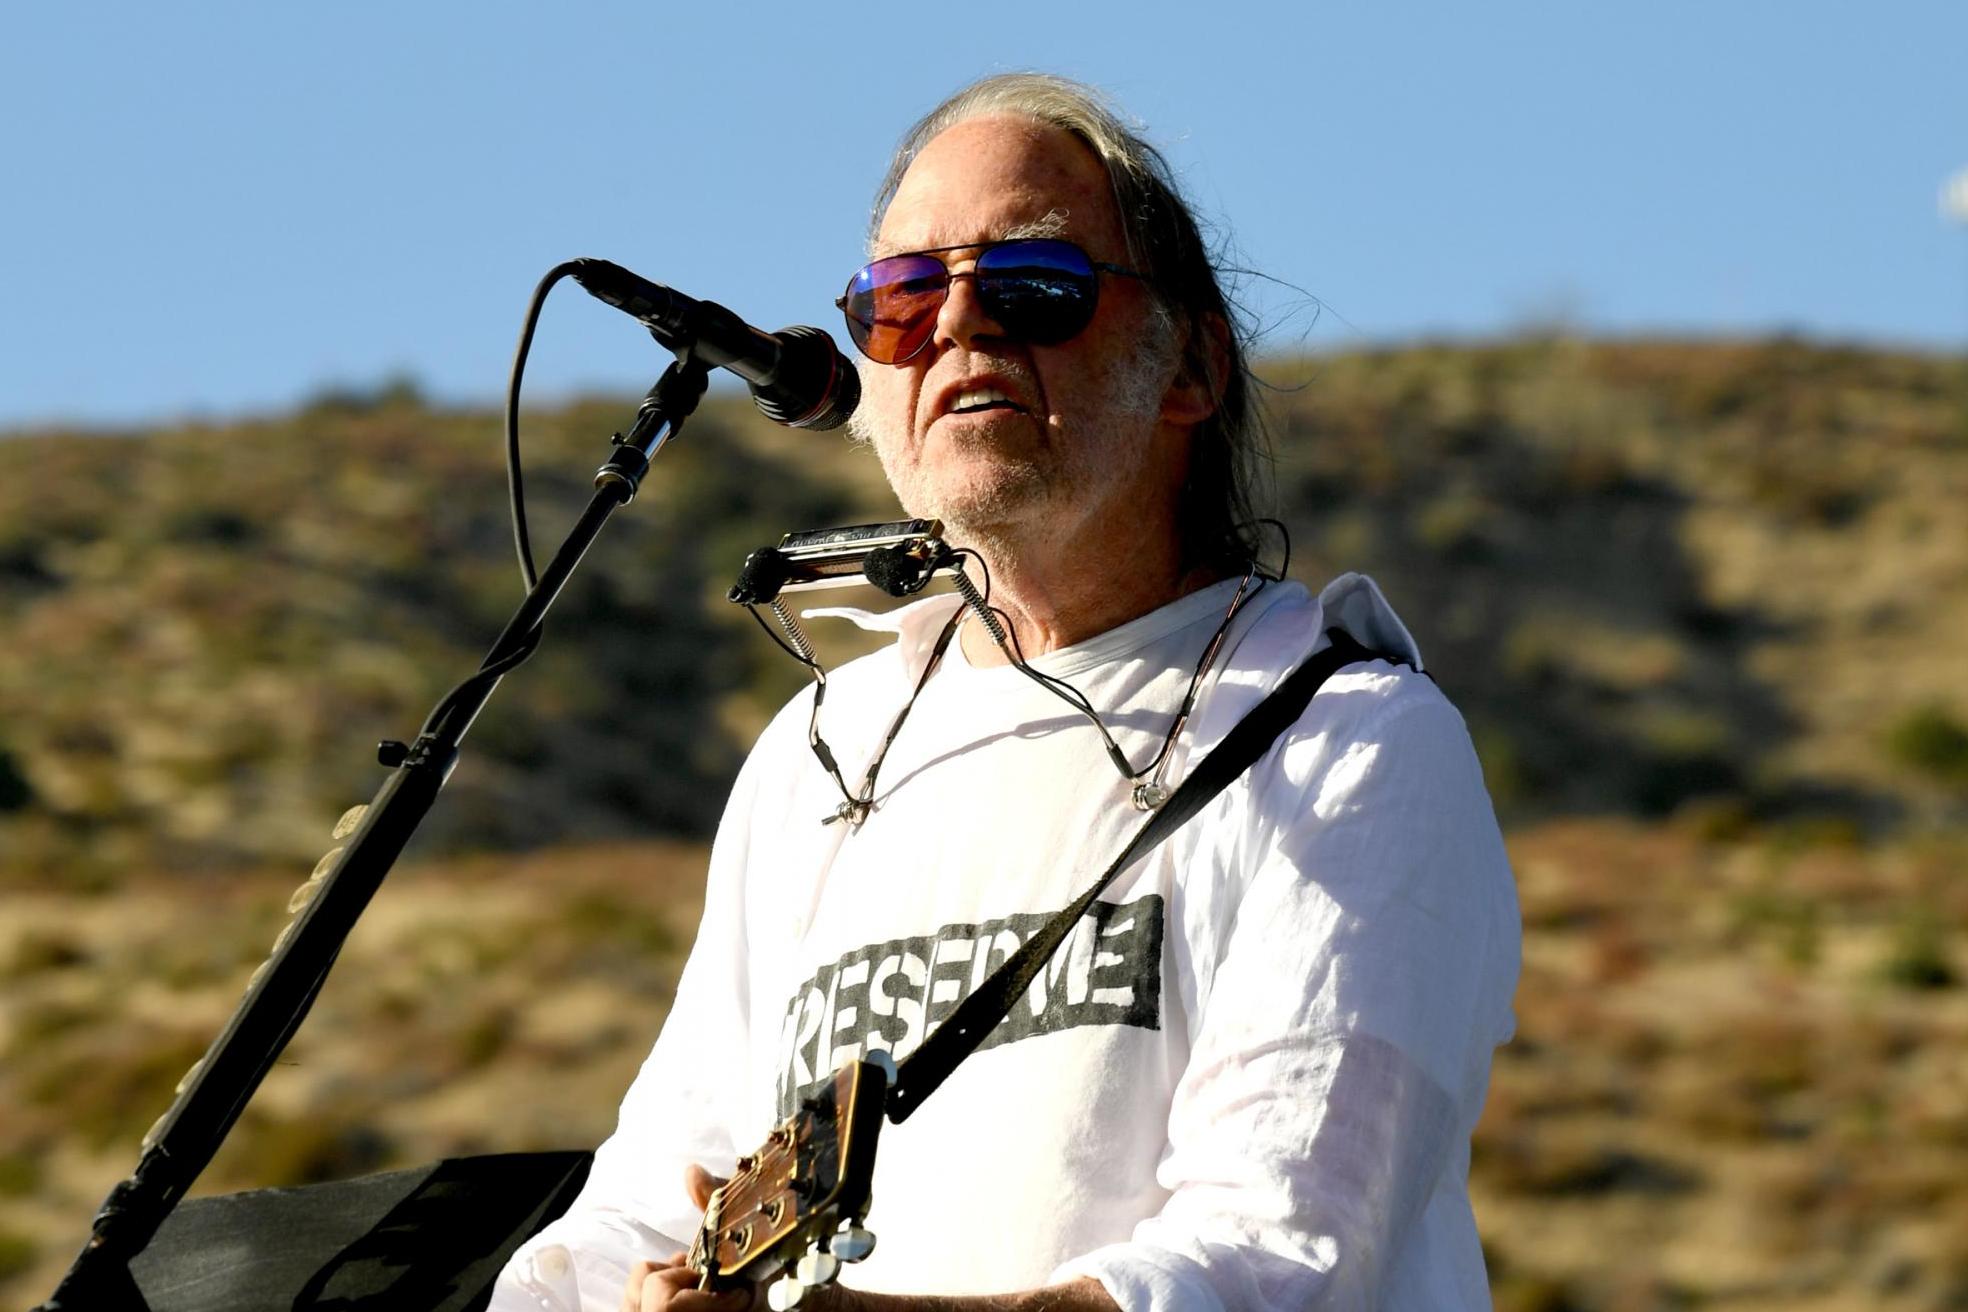 Neil Young performs at a benefit on 14 September 2019 in Lake Hughes, California.